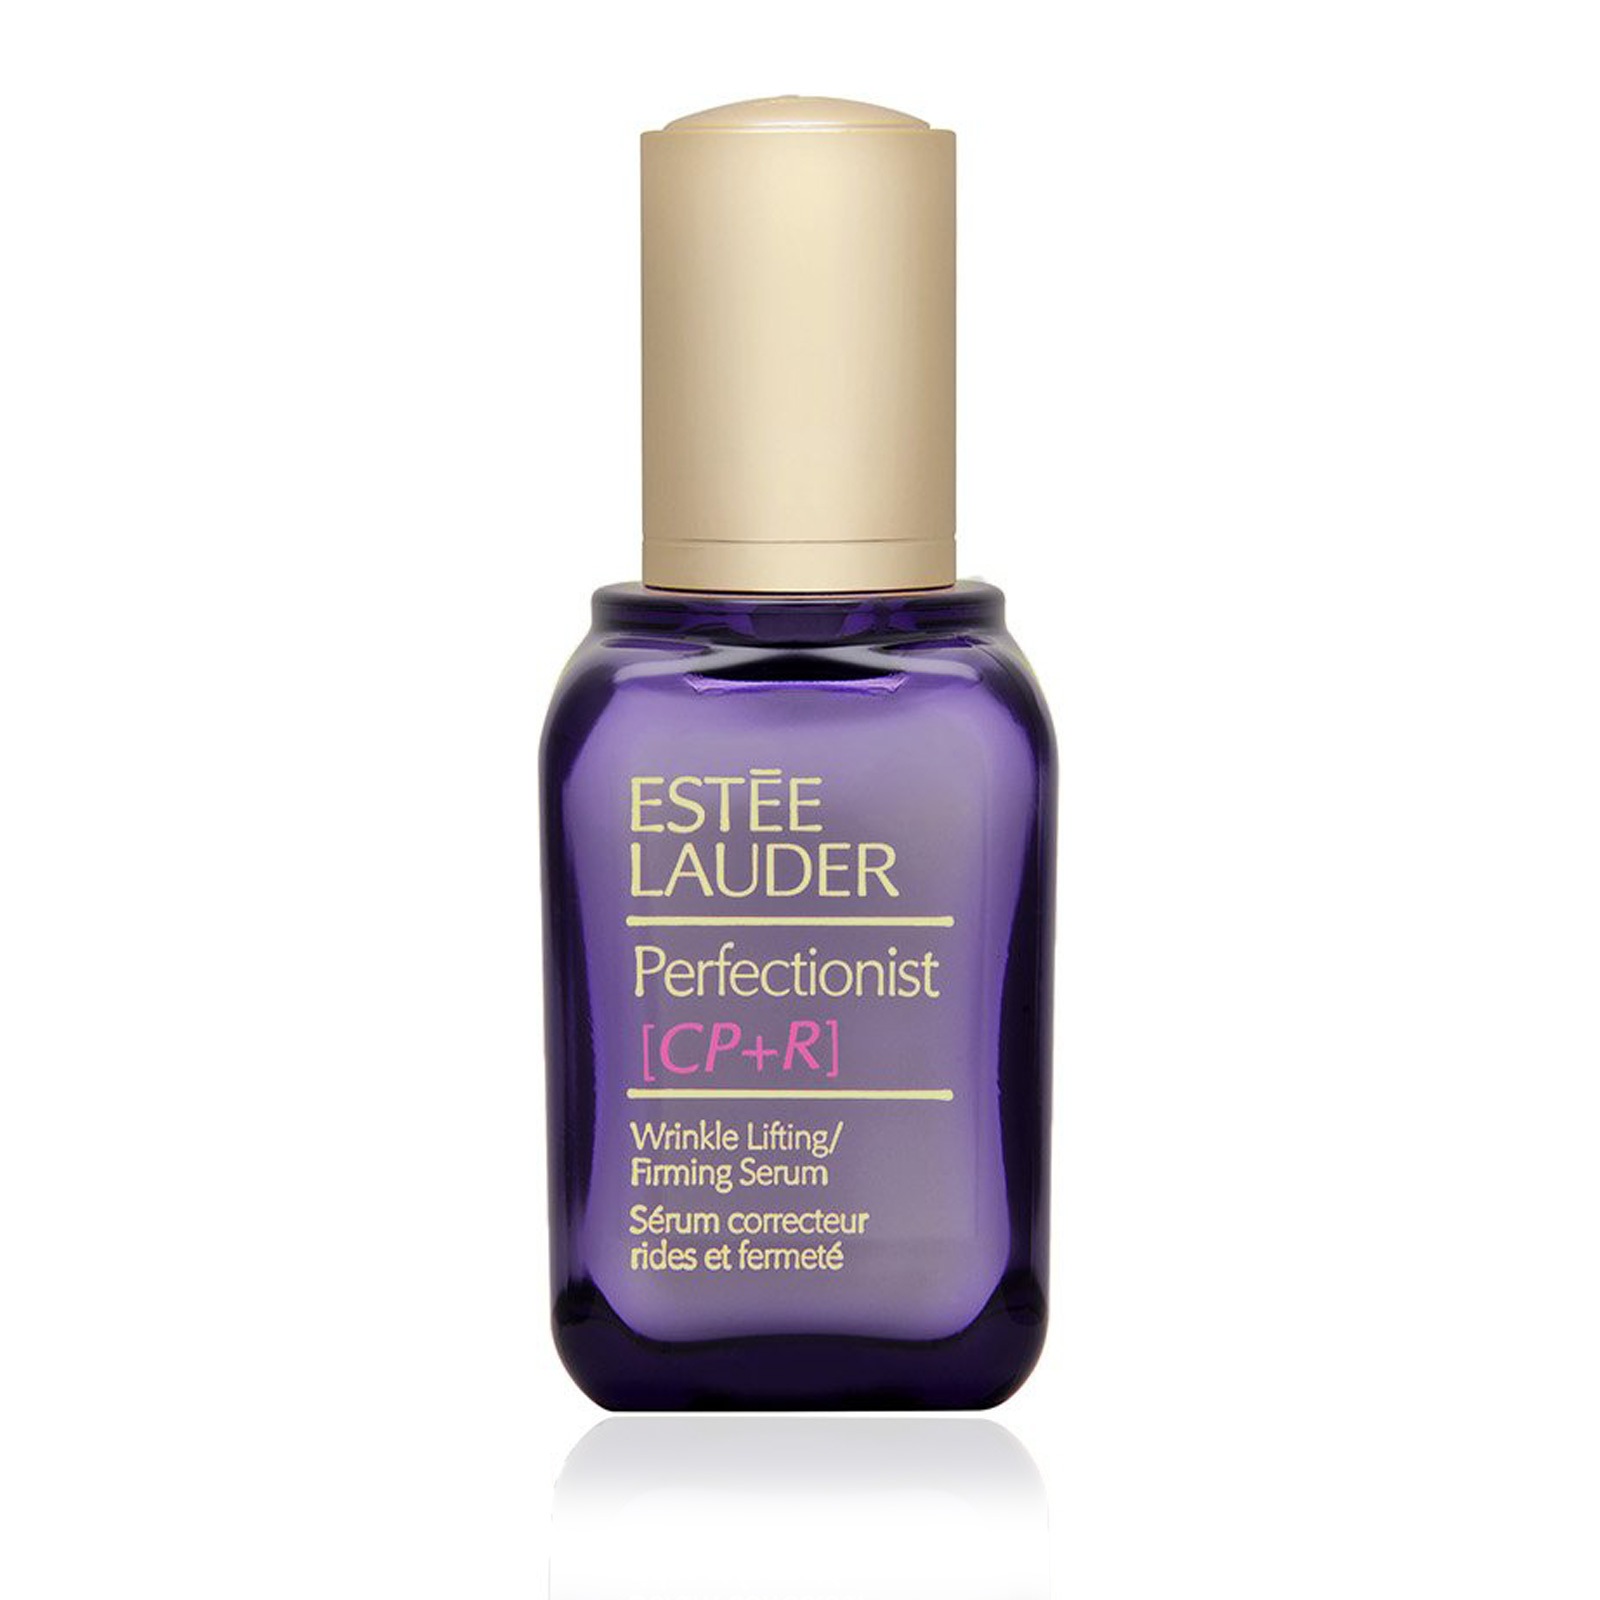 Perfectionist [CP+R] Wrinkle Lifting / Firming Serum